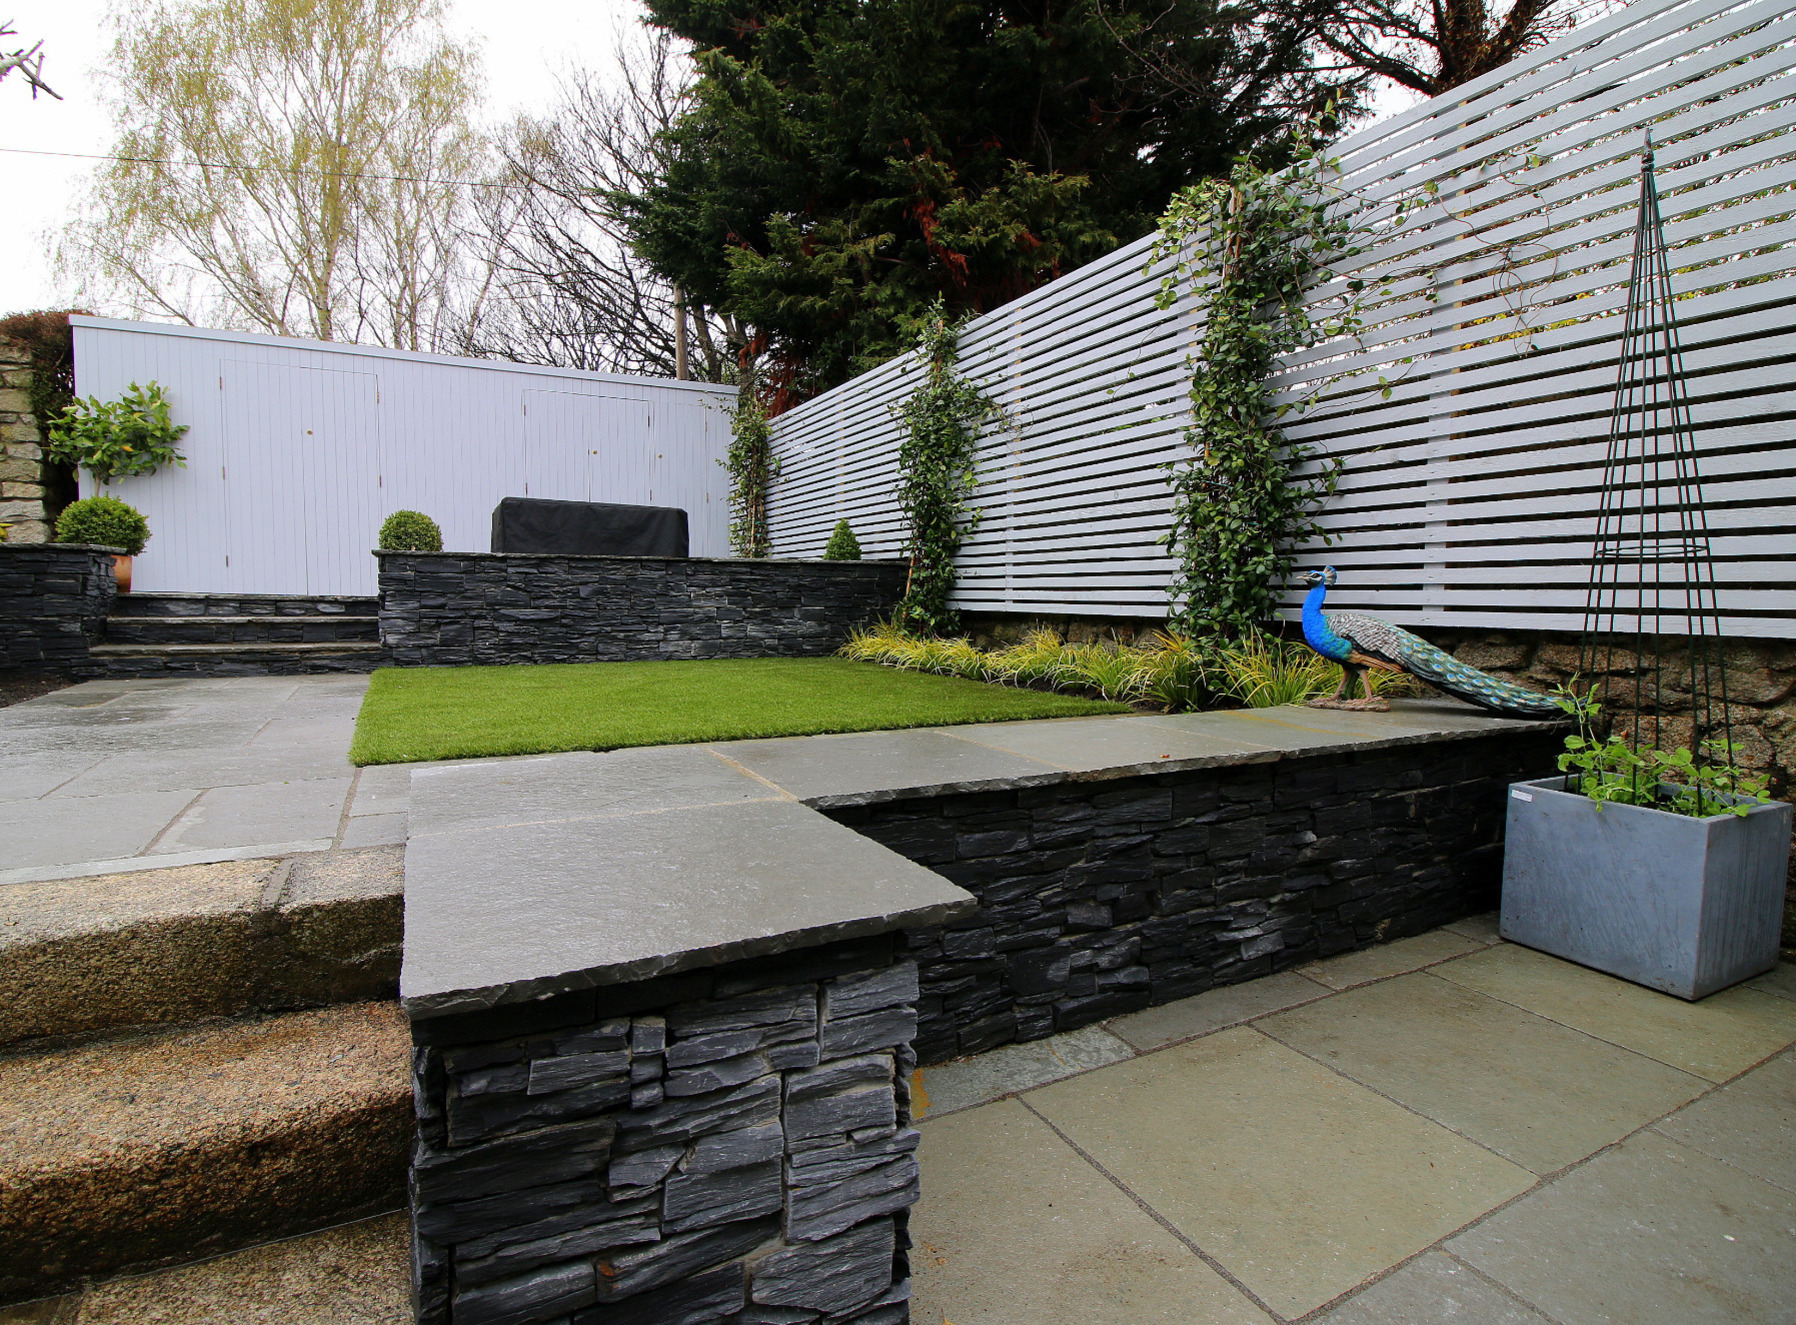 Terrace patio design & installation in Rathmines, Dublin 6 | Owen Chubb Landscaping for discerning Homeowners